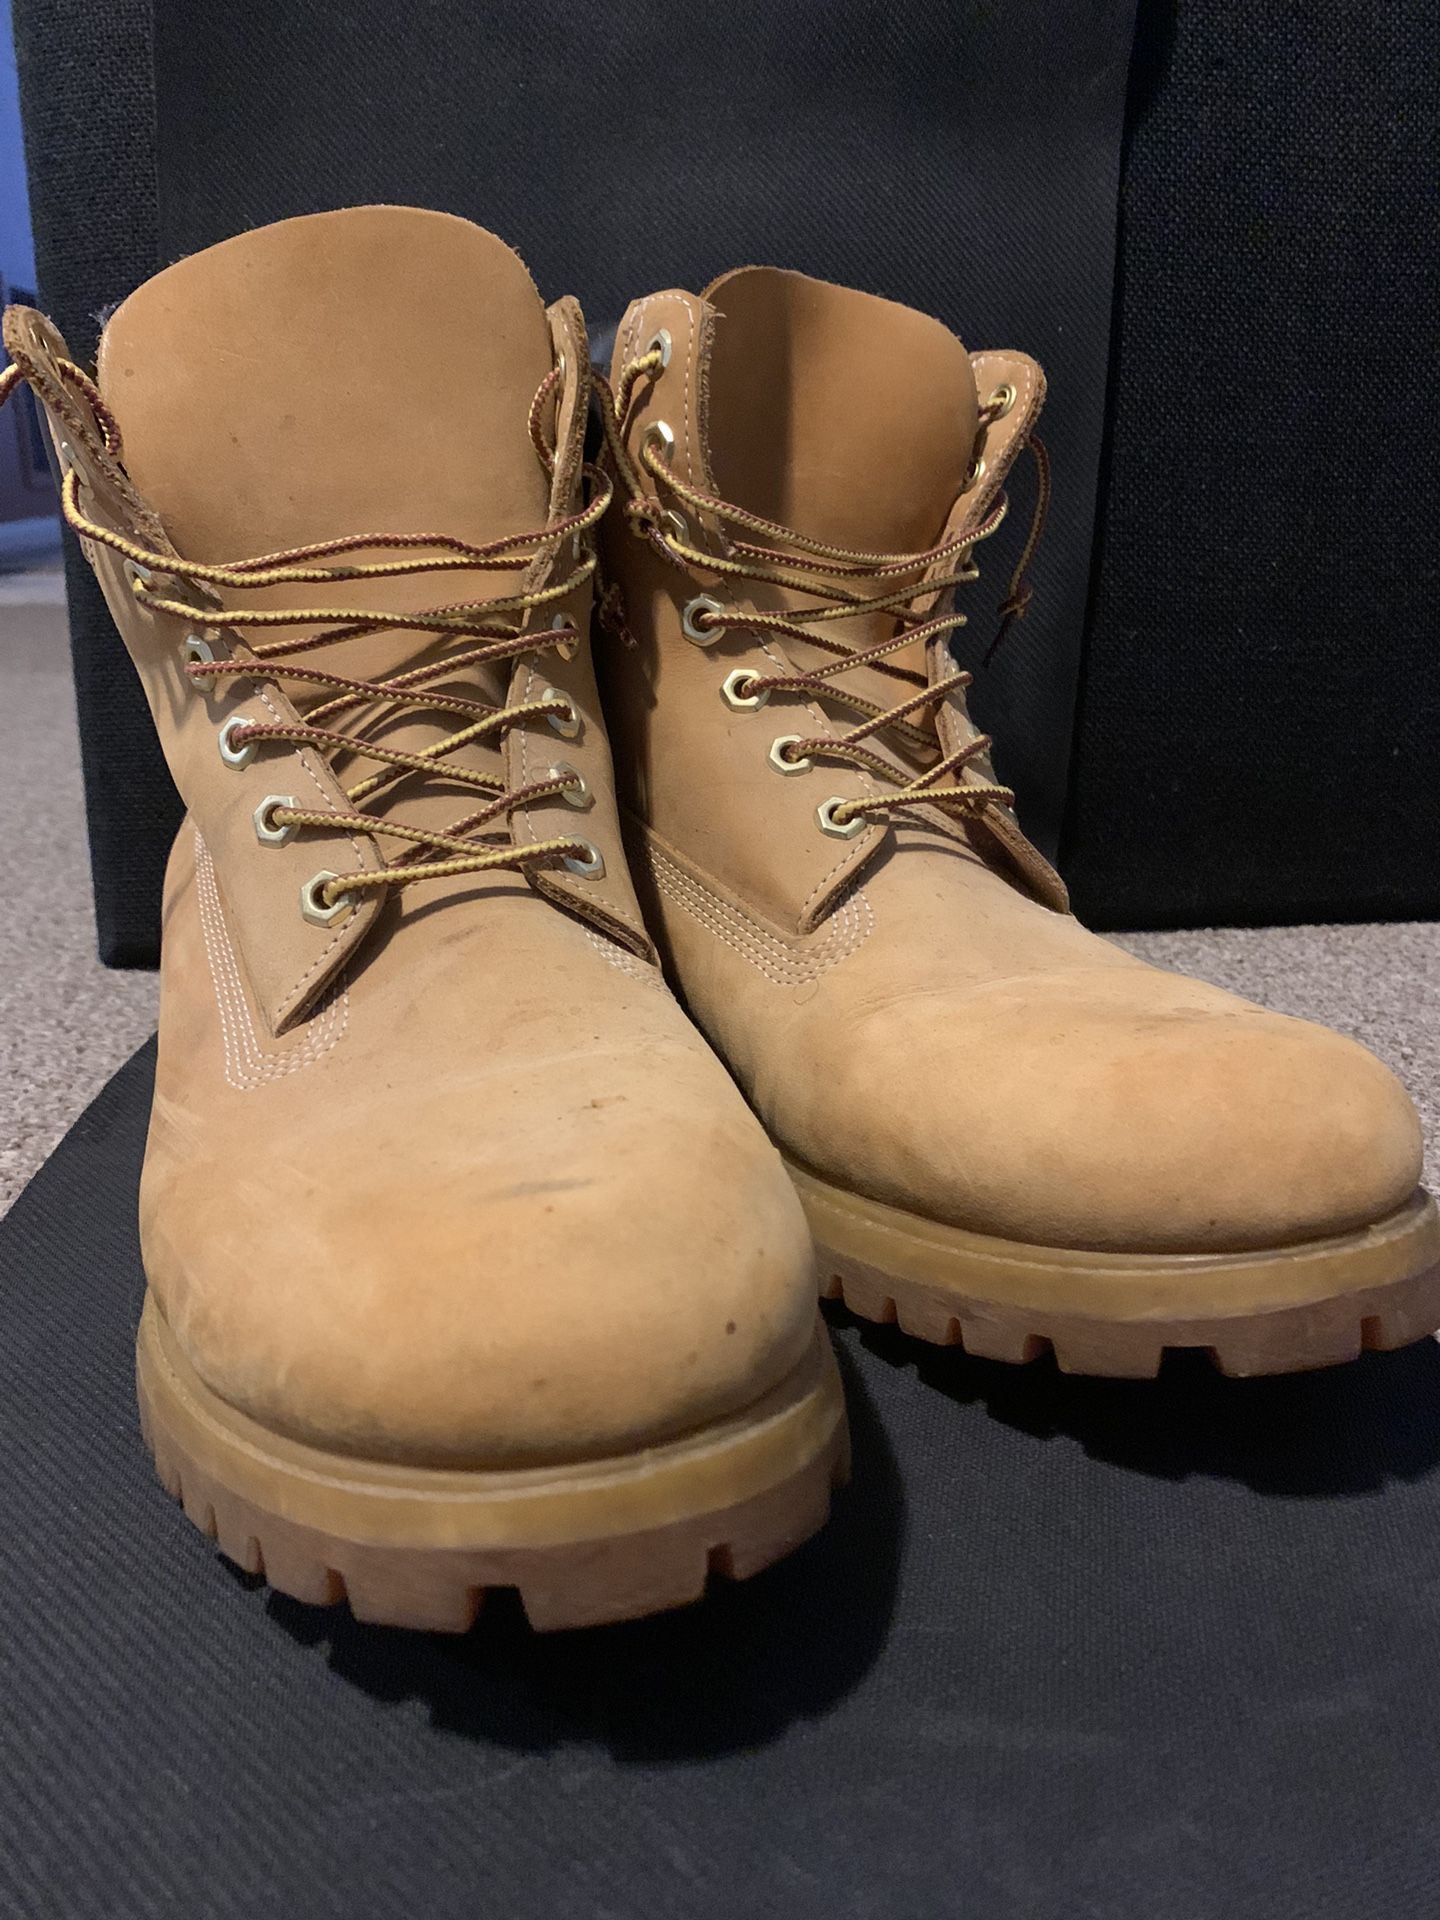 Wheat Timberlands Size 11 For Sale Used Still Good Condition $75